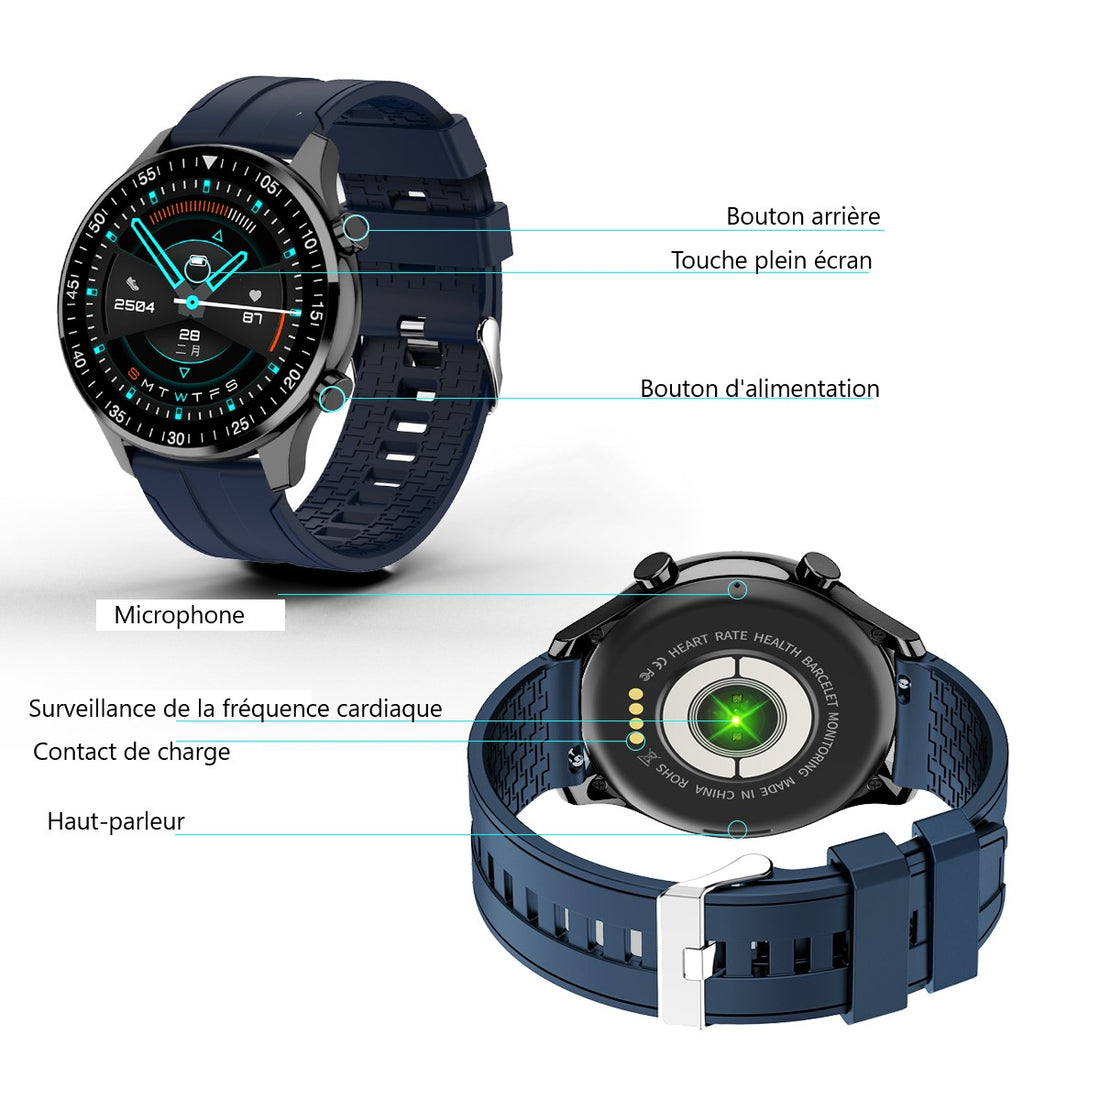 MONTRE CONNECTEE BLUETOOTH MULTIFONCTIONS